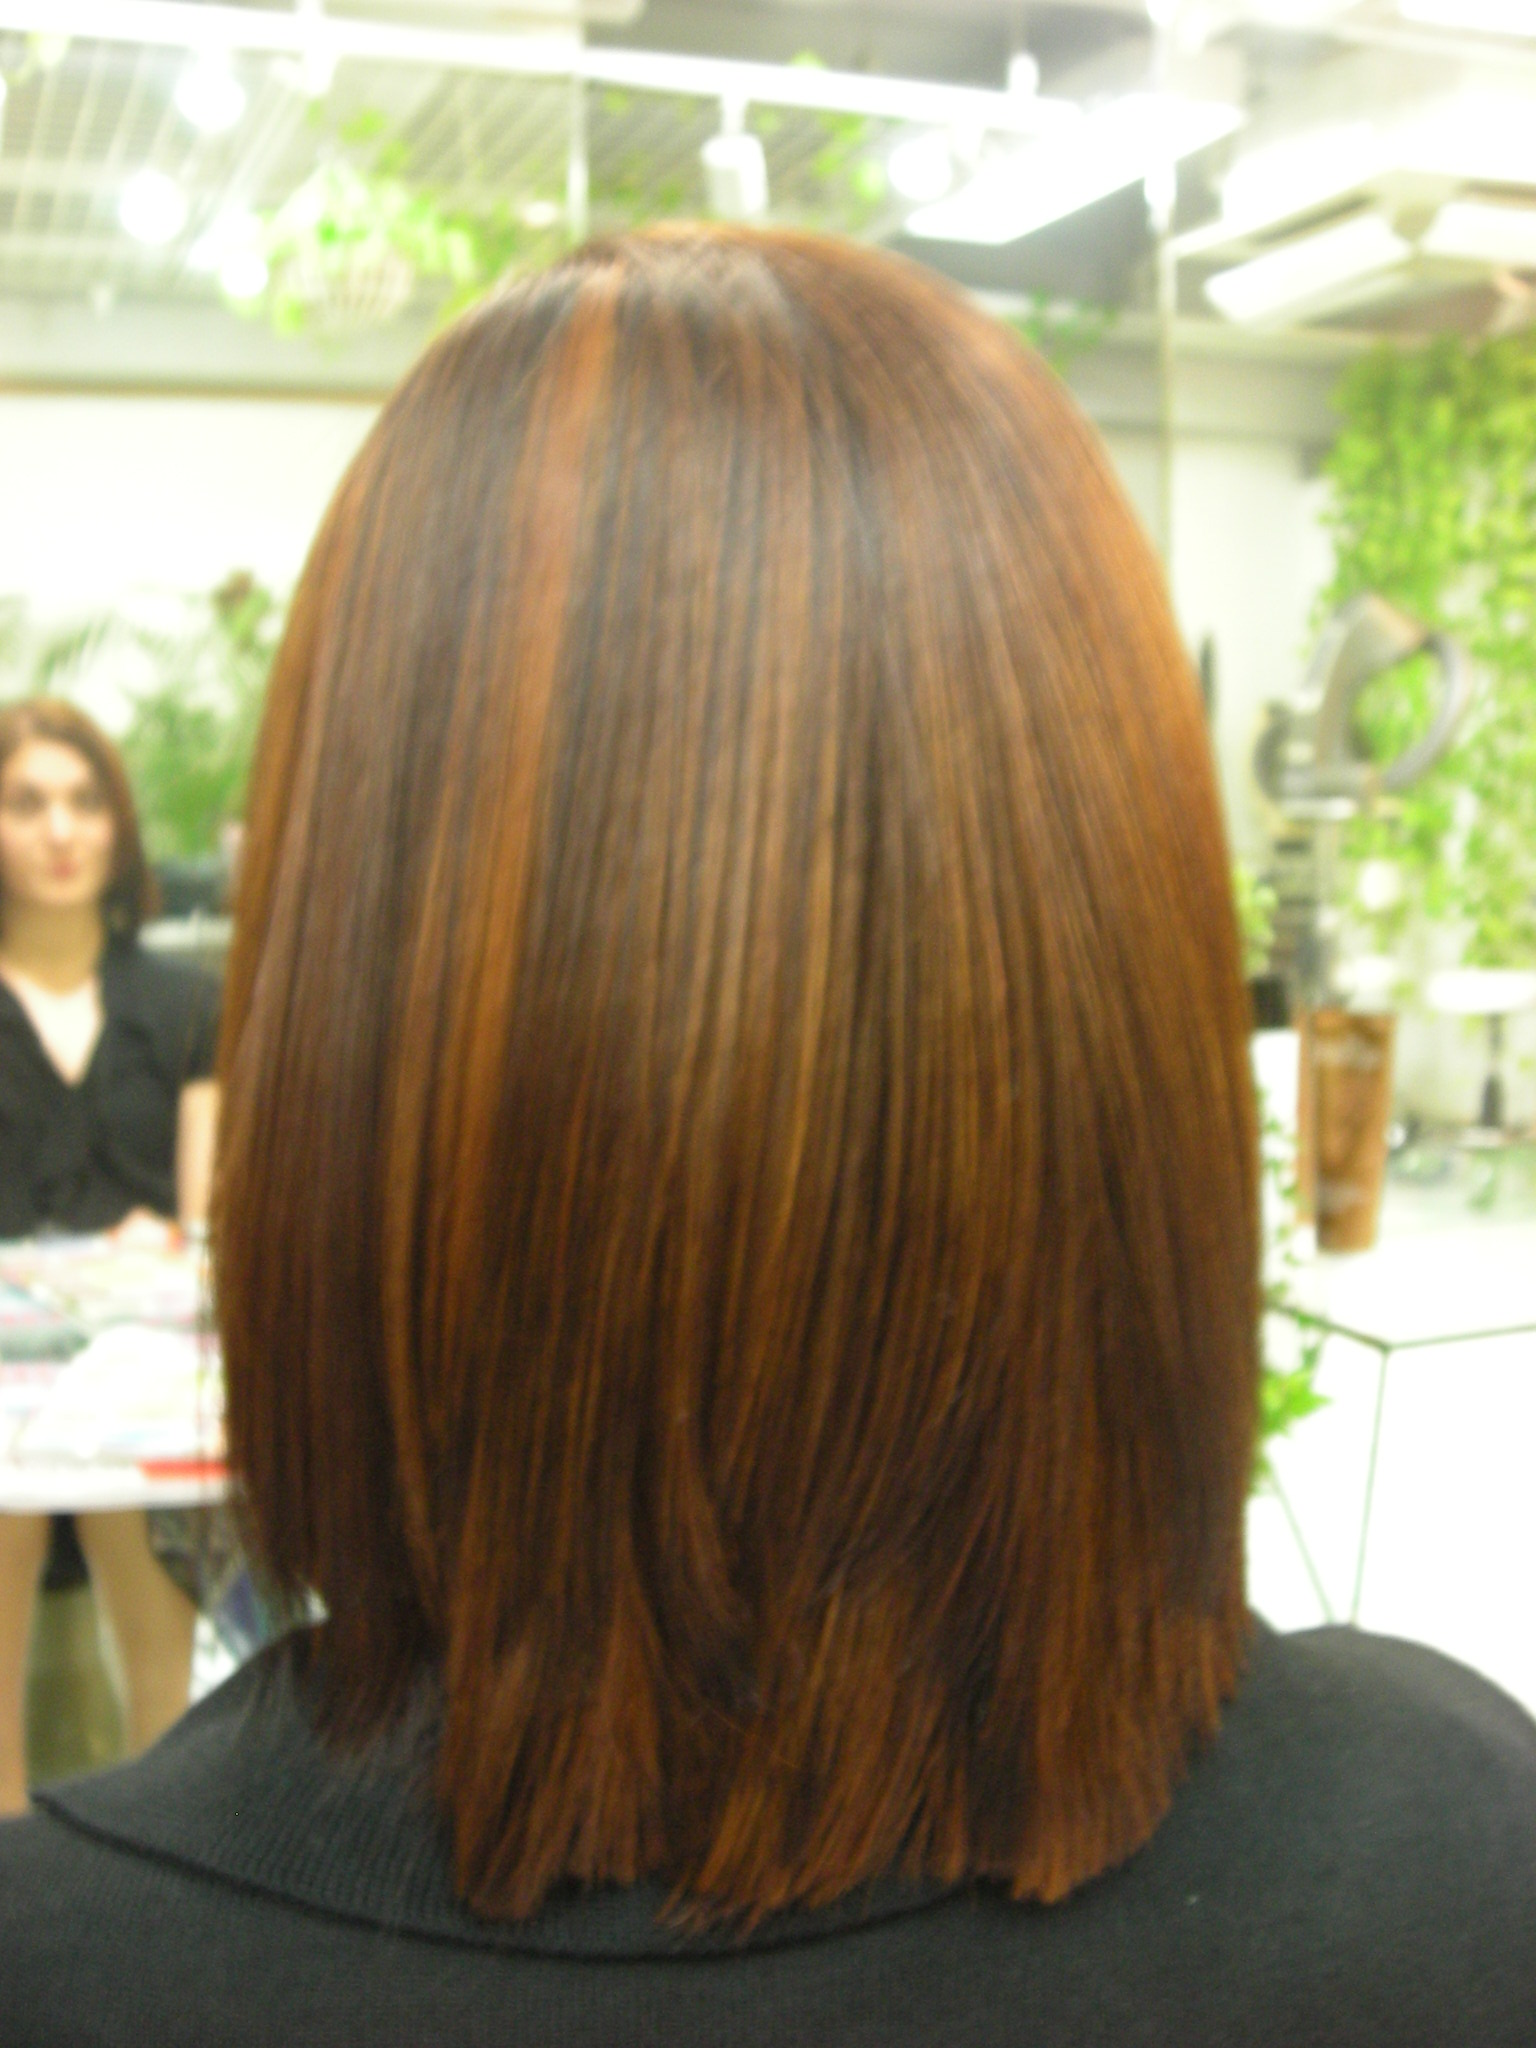 Fix up the style and the color for Nicole. | English Speaking Hair Stylist:  Haircuts, Perm & Color - Yokohama, Japan